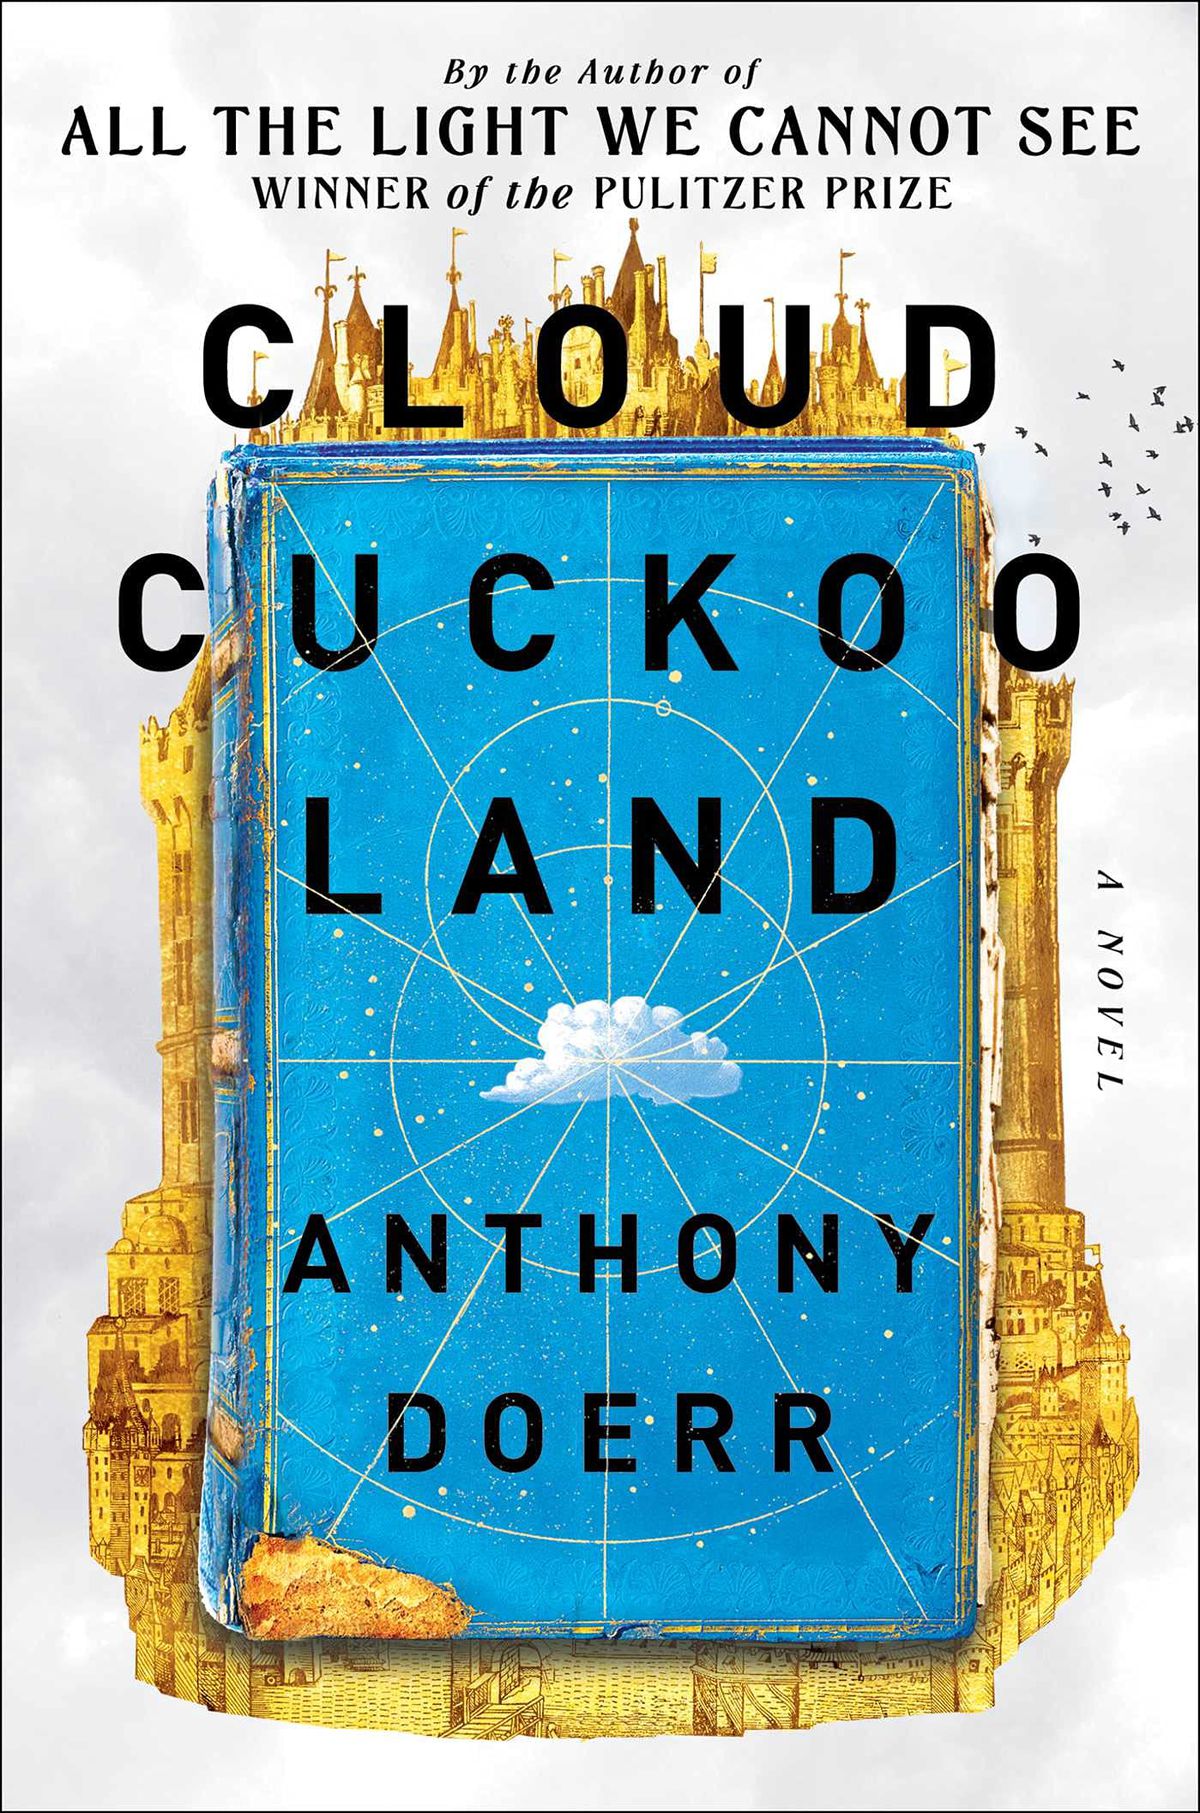 A cover for “Cloud Cuckoo Land” by Anthony Doerr which shows an image of the book with a city built around it